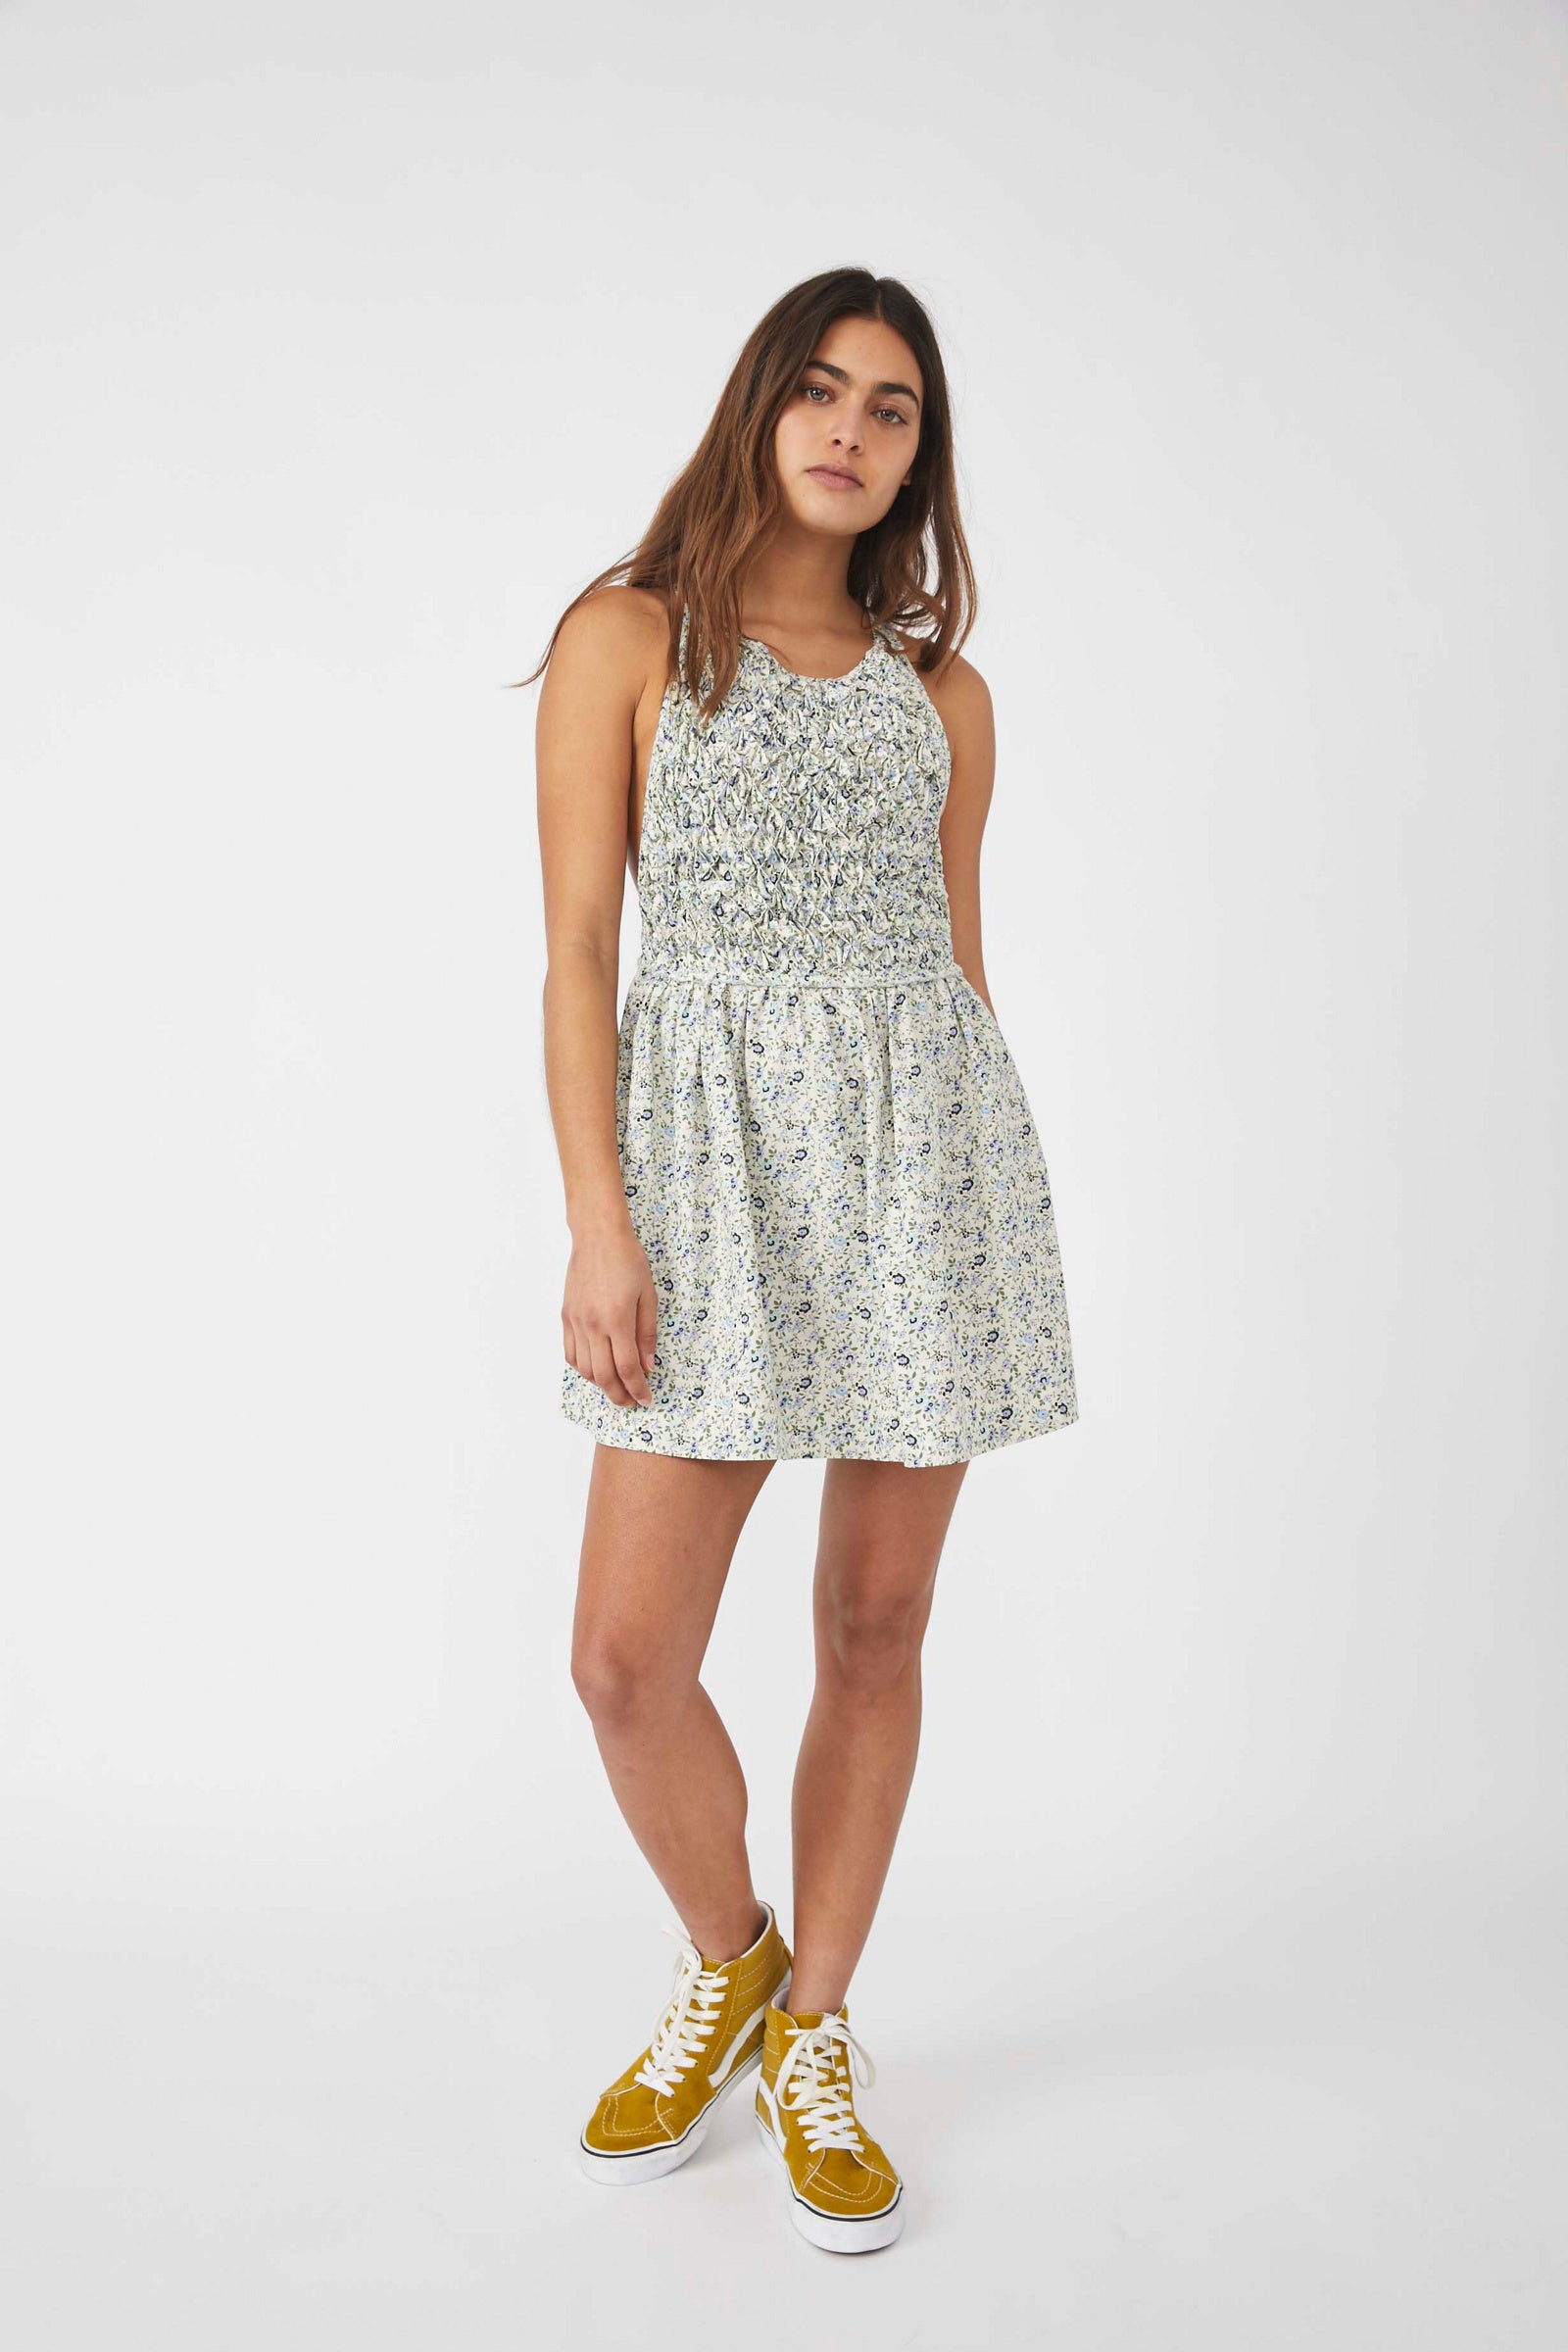 FREE PEOPLE PETUNIA MINI DRESS - This apron silhouette mini dress has a textured bodice, scoop necklines, side packets and crisscross straps in the back.  ShopIDB.com